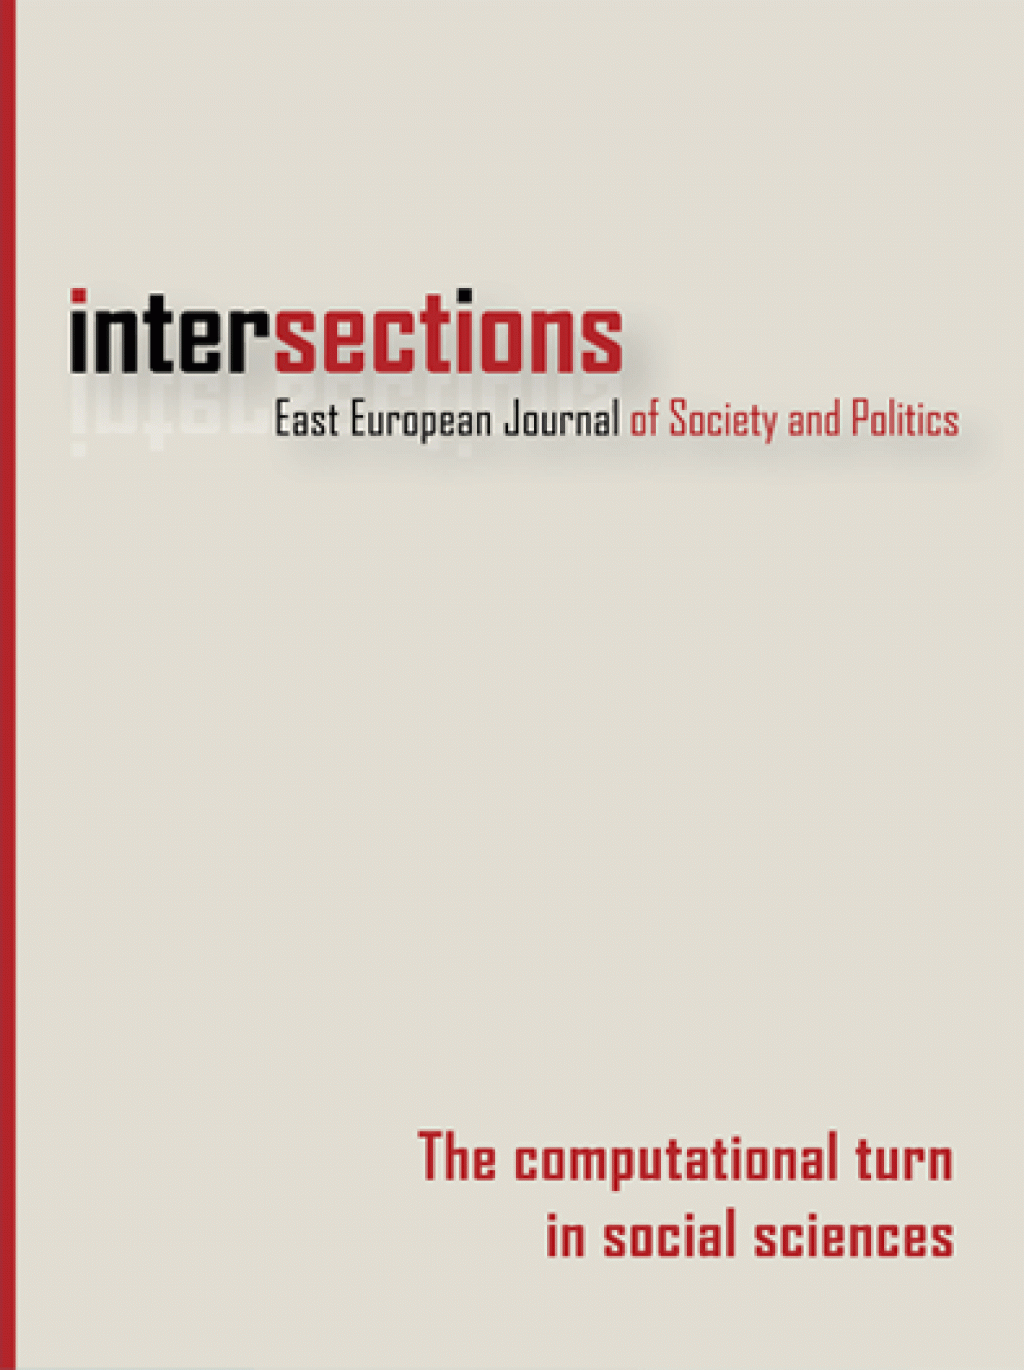 Intersections_East European Journal of Society and Politics